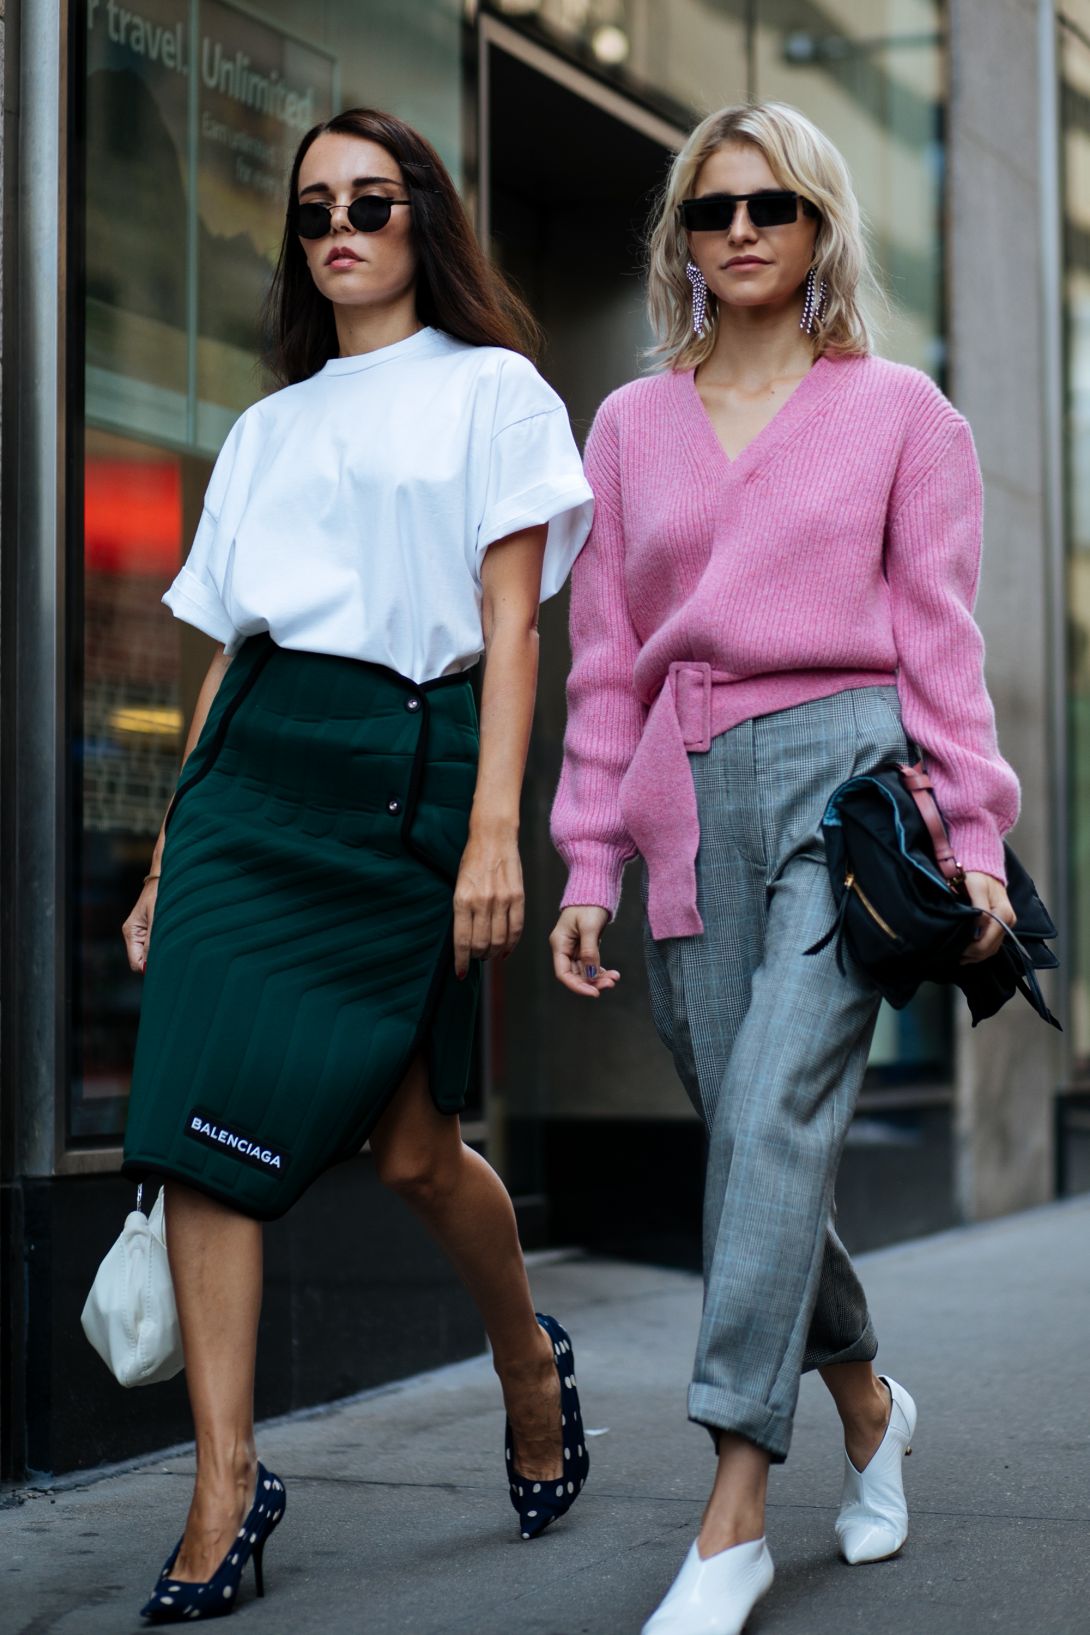 The Best NYFW Street Style You Need to See - FashionFiles